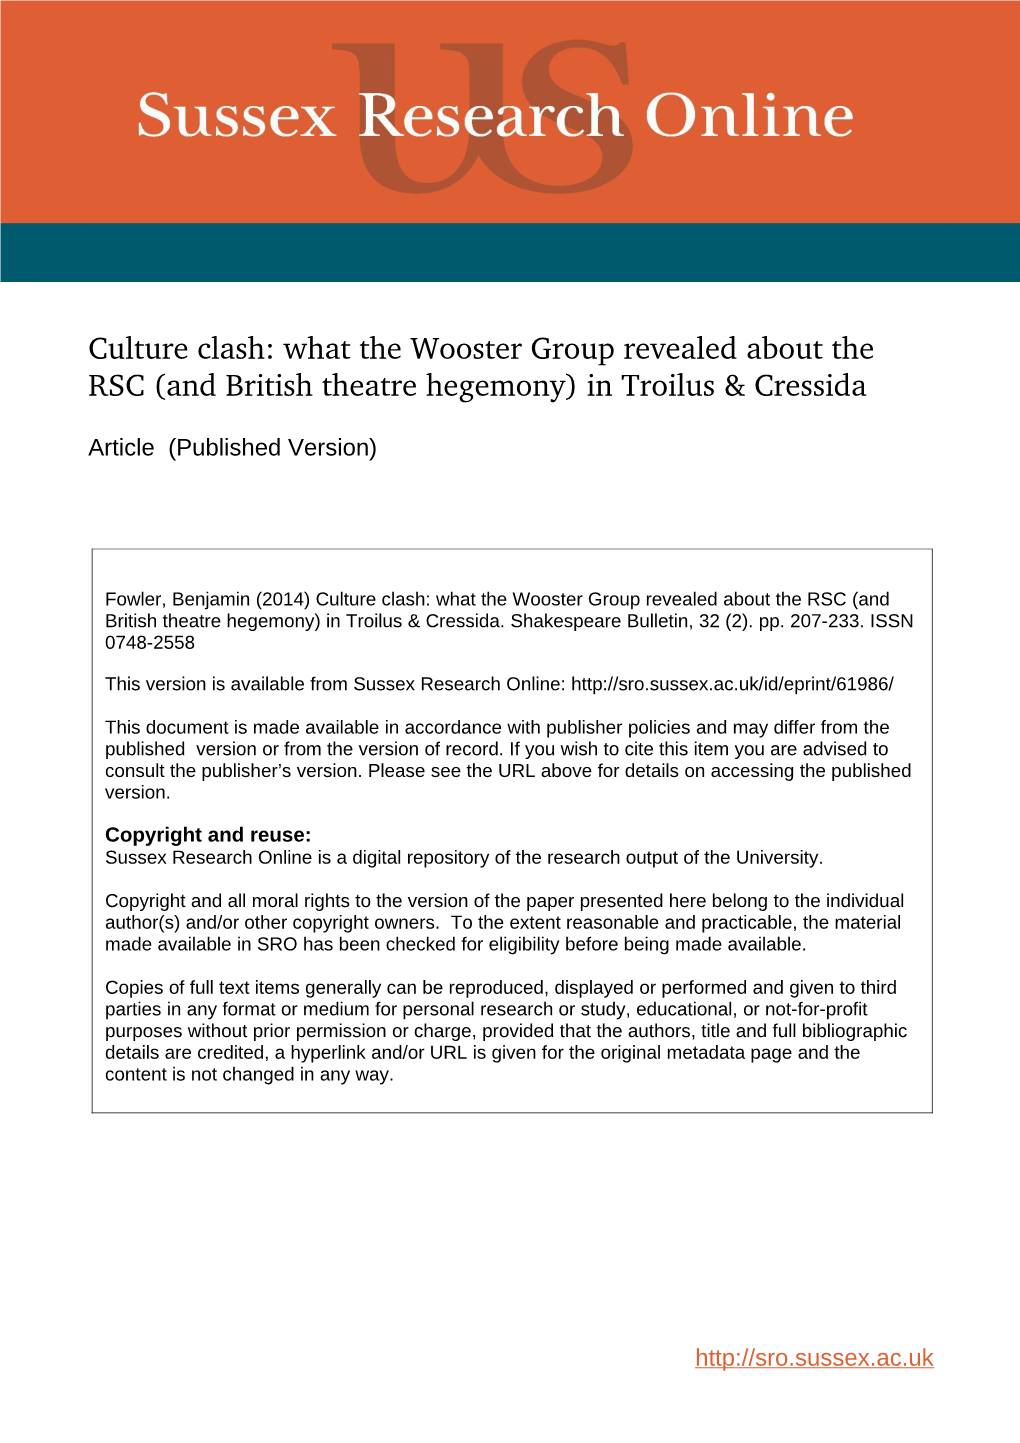 Culture Clash: What the Wooster Group Revealed About the RSC (And British Theatre Hegemony) in Troilus & Cressida